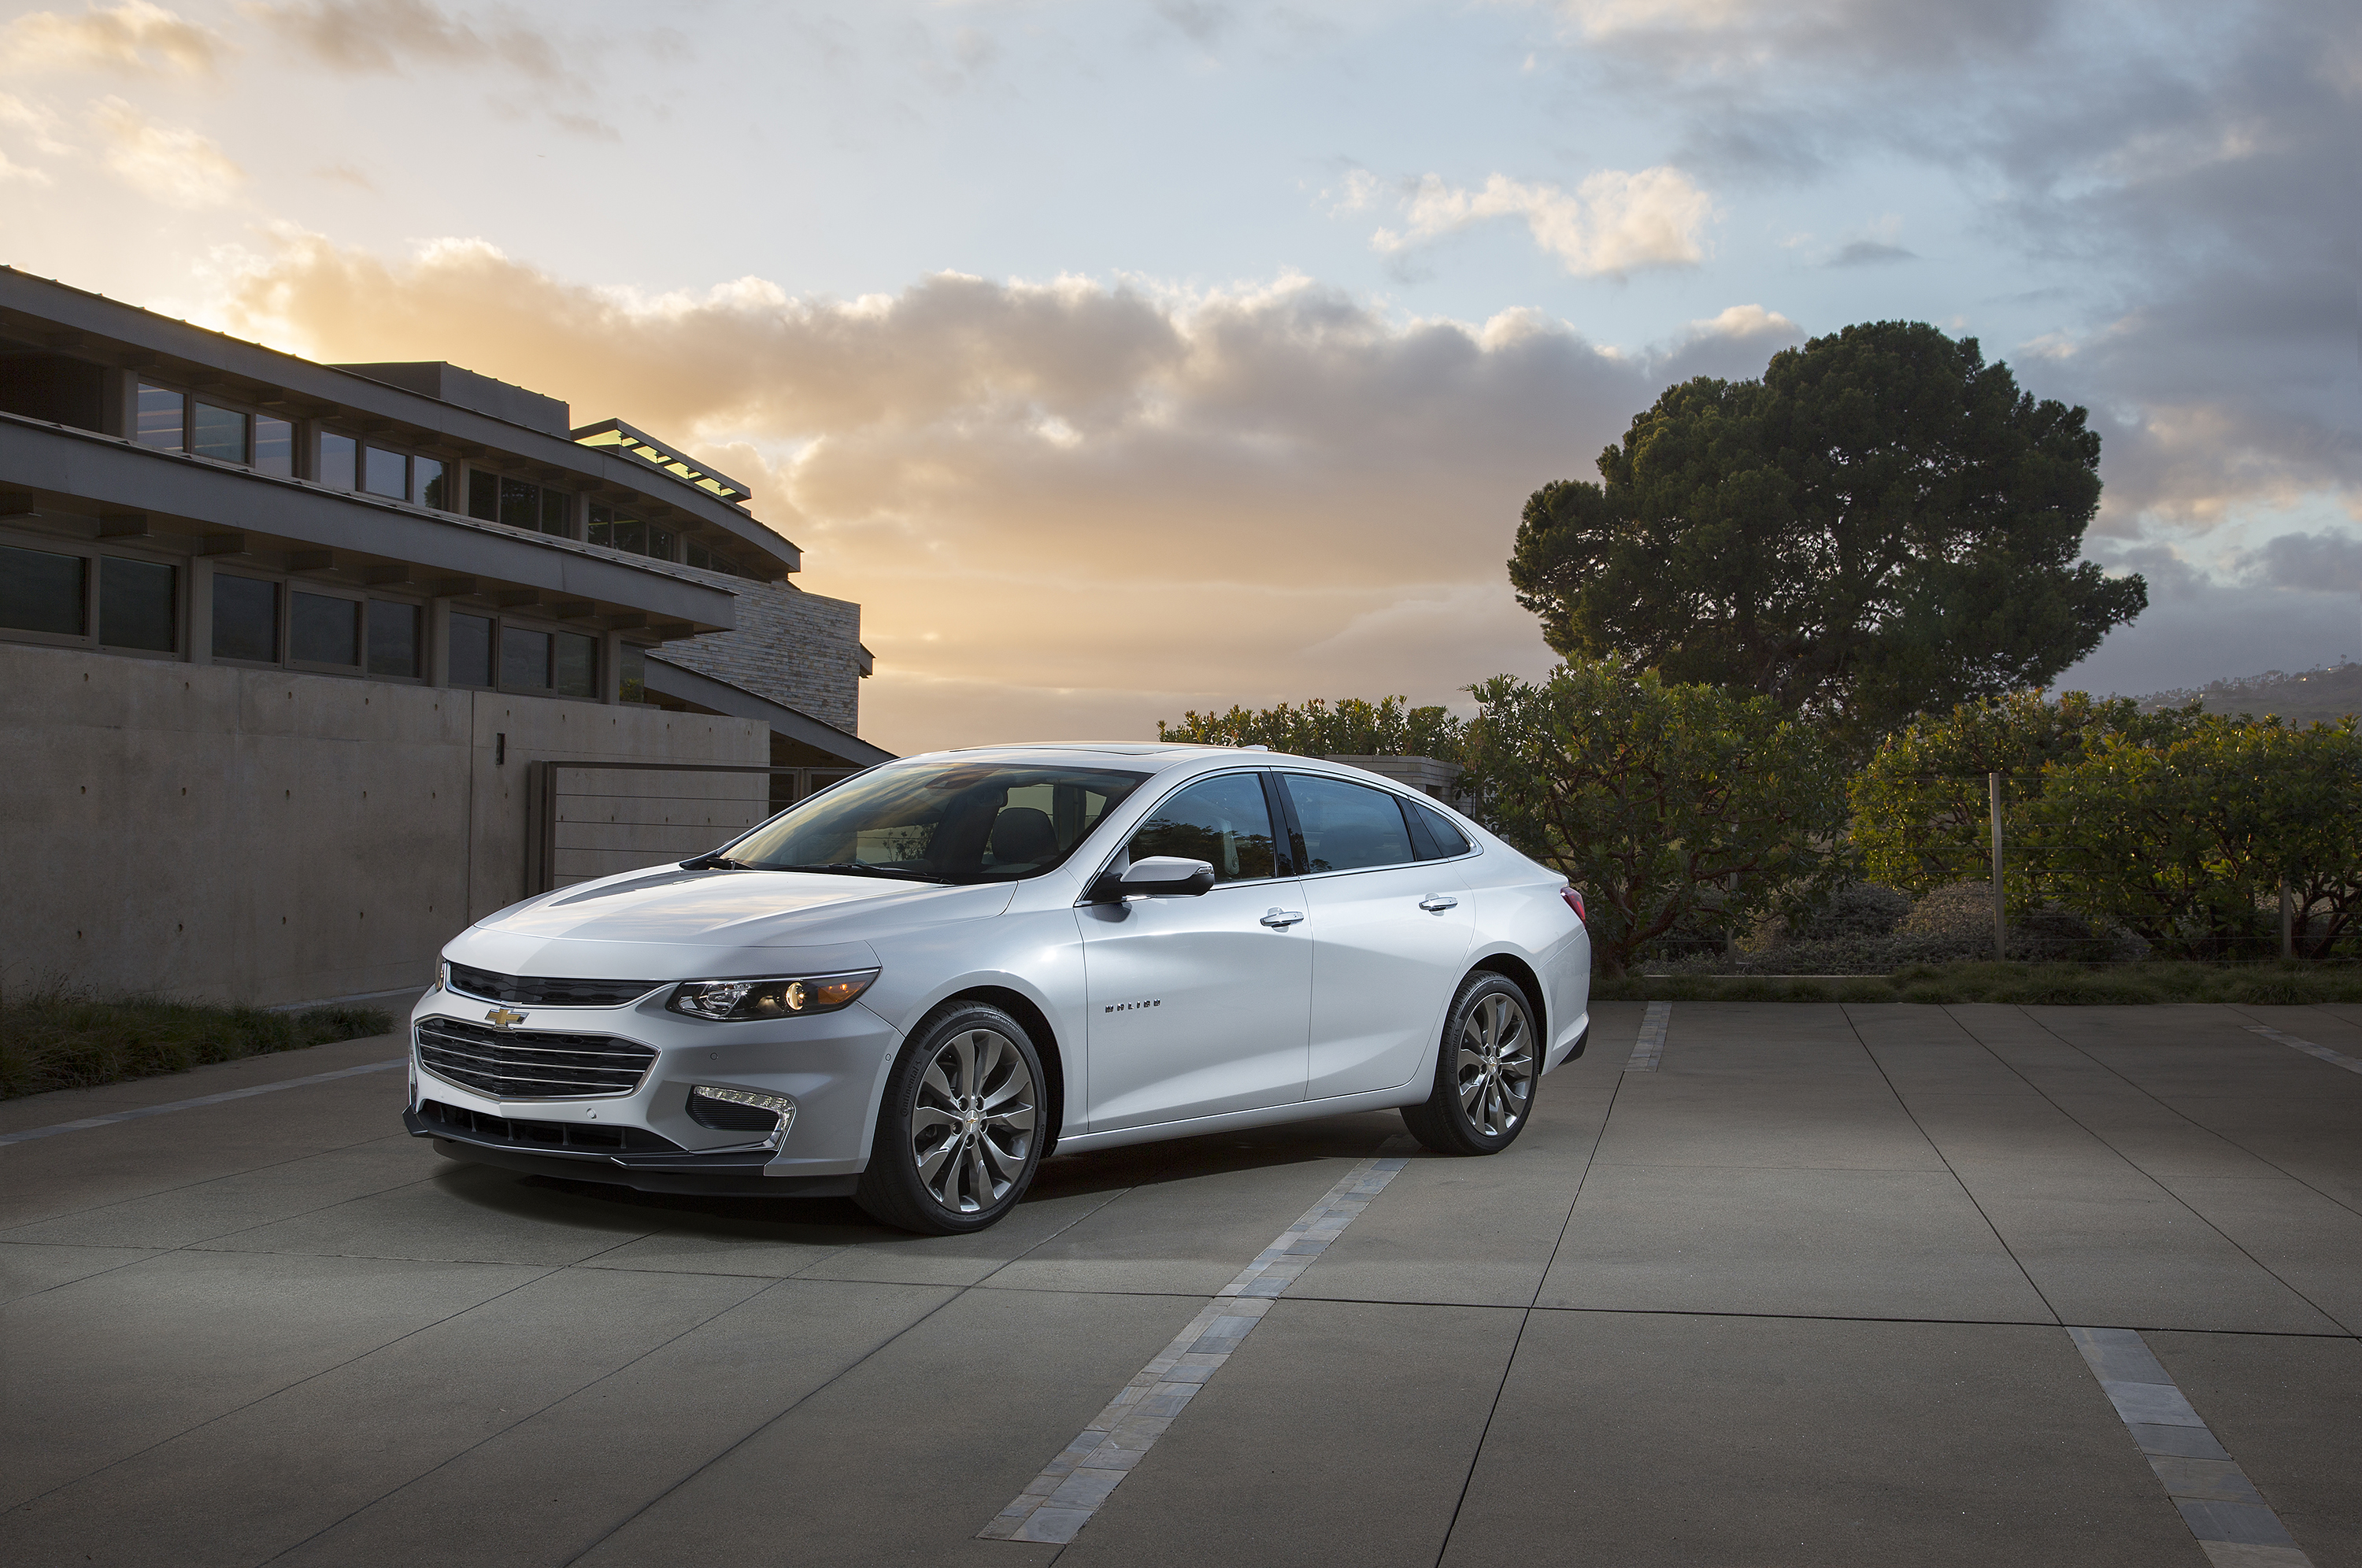 All-New Malibu is Larger, More Technological and Efficient